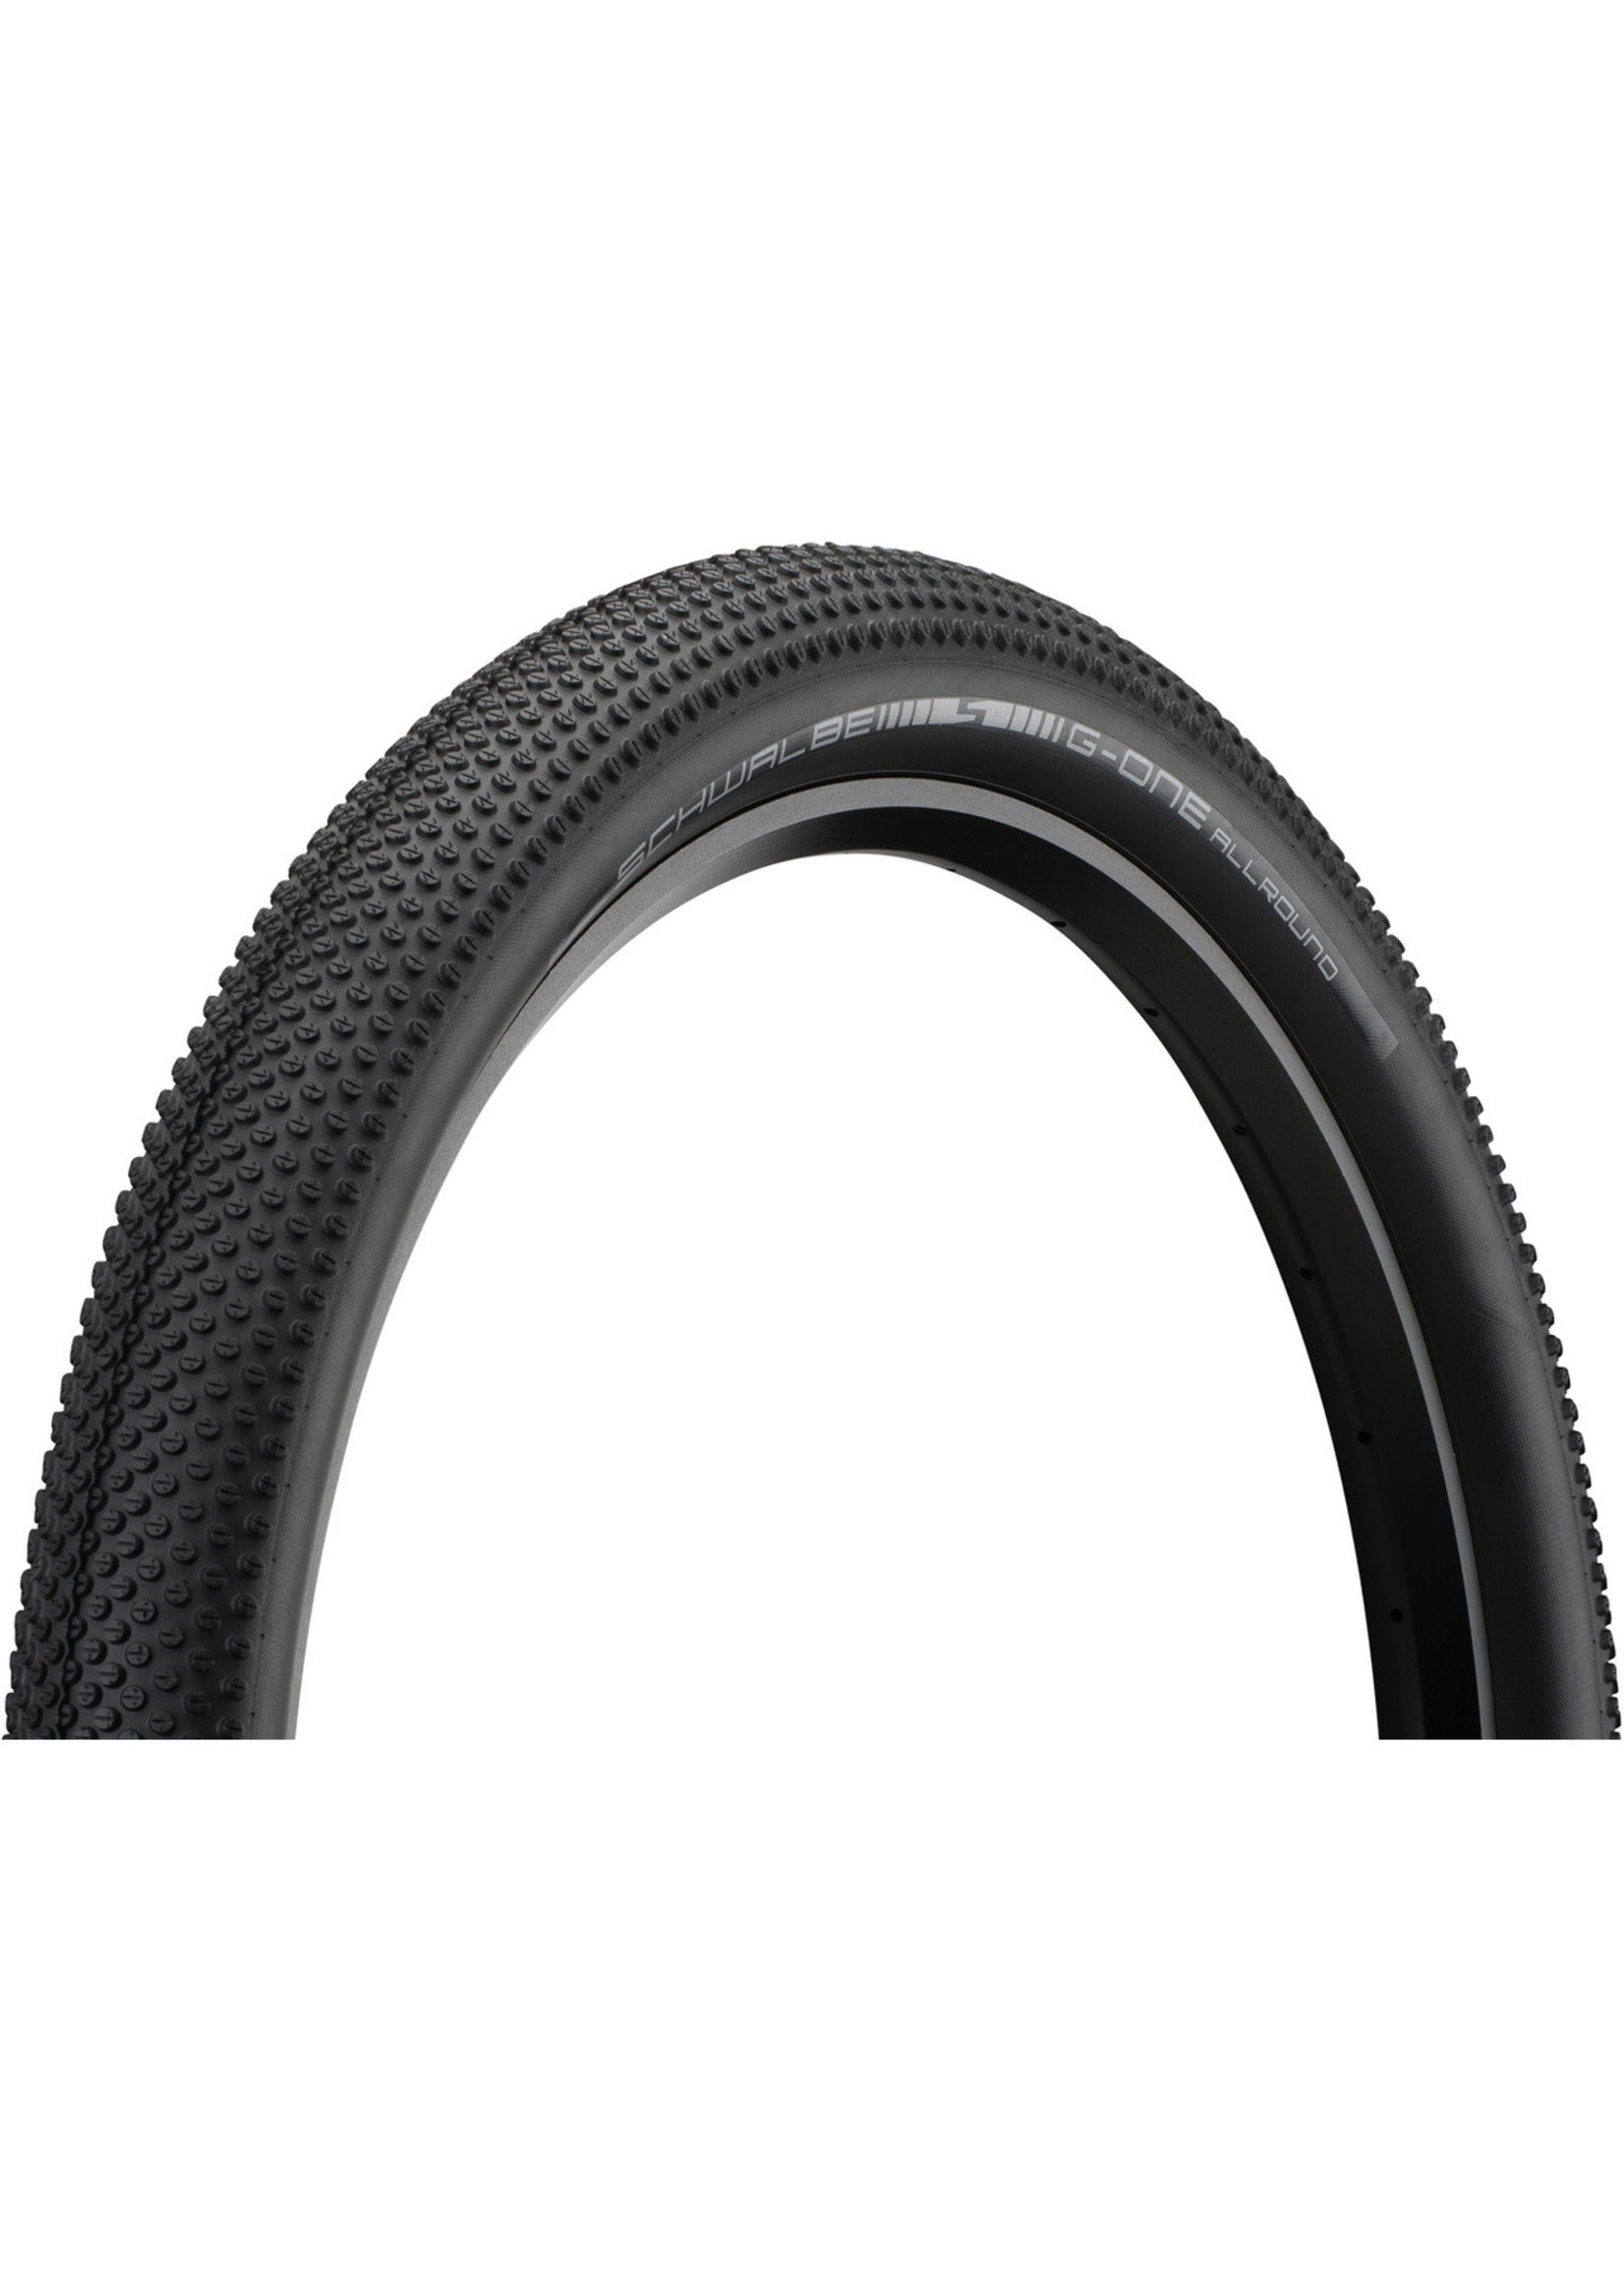 Schwalbe Schwalbe G-One Allround, 27.5 x 2.80 (70-584) Black, Double Defence, RaceGuard, Tubeless Easy, Performance, Addix, Folding